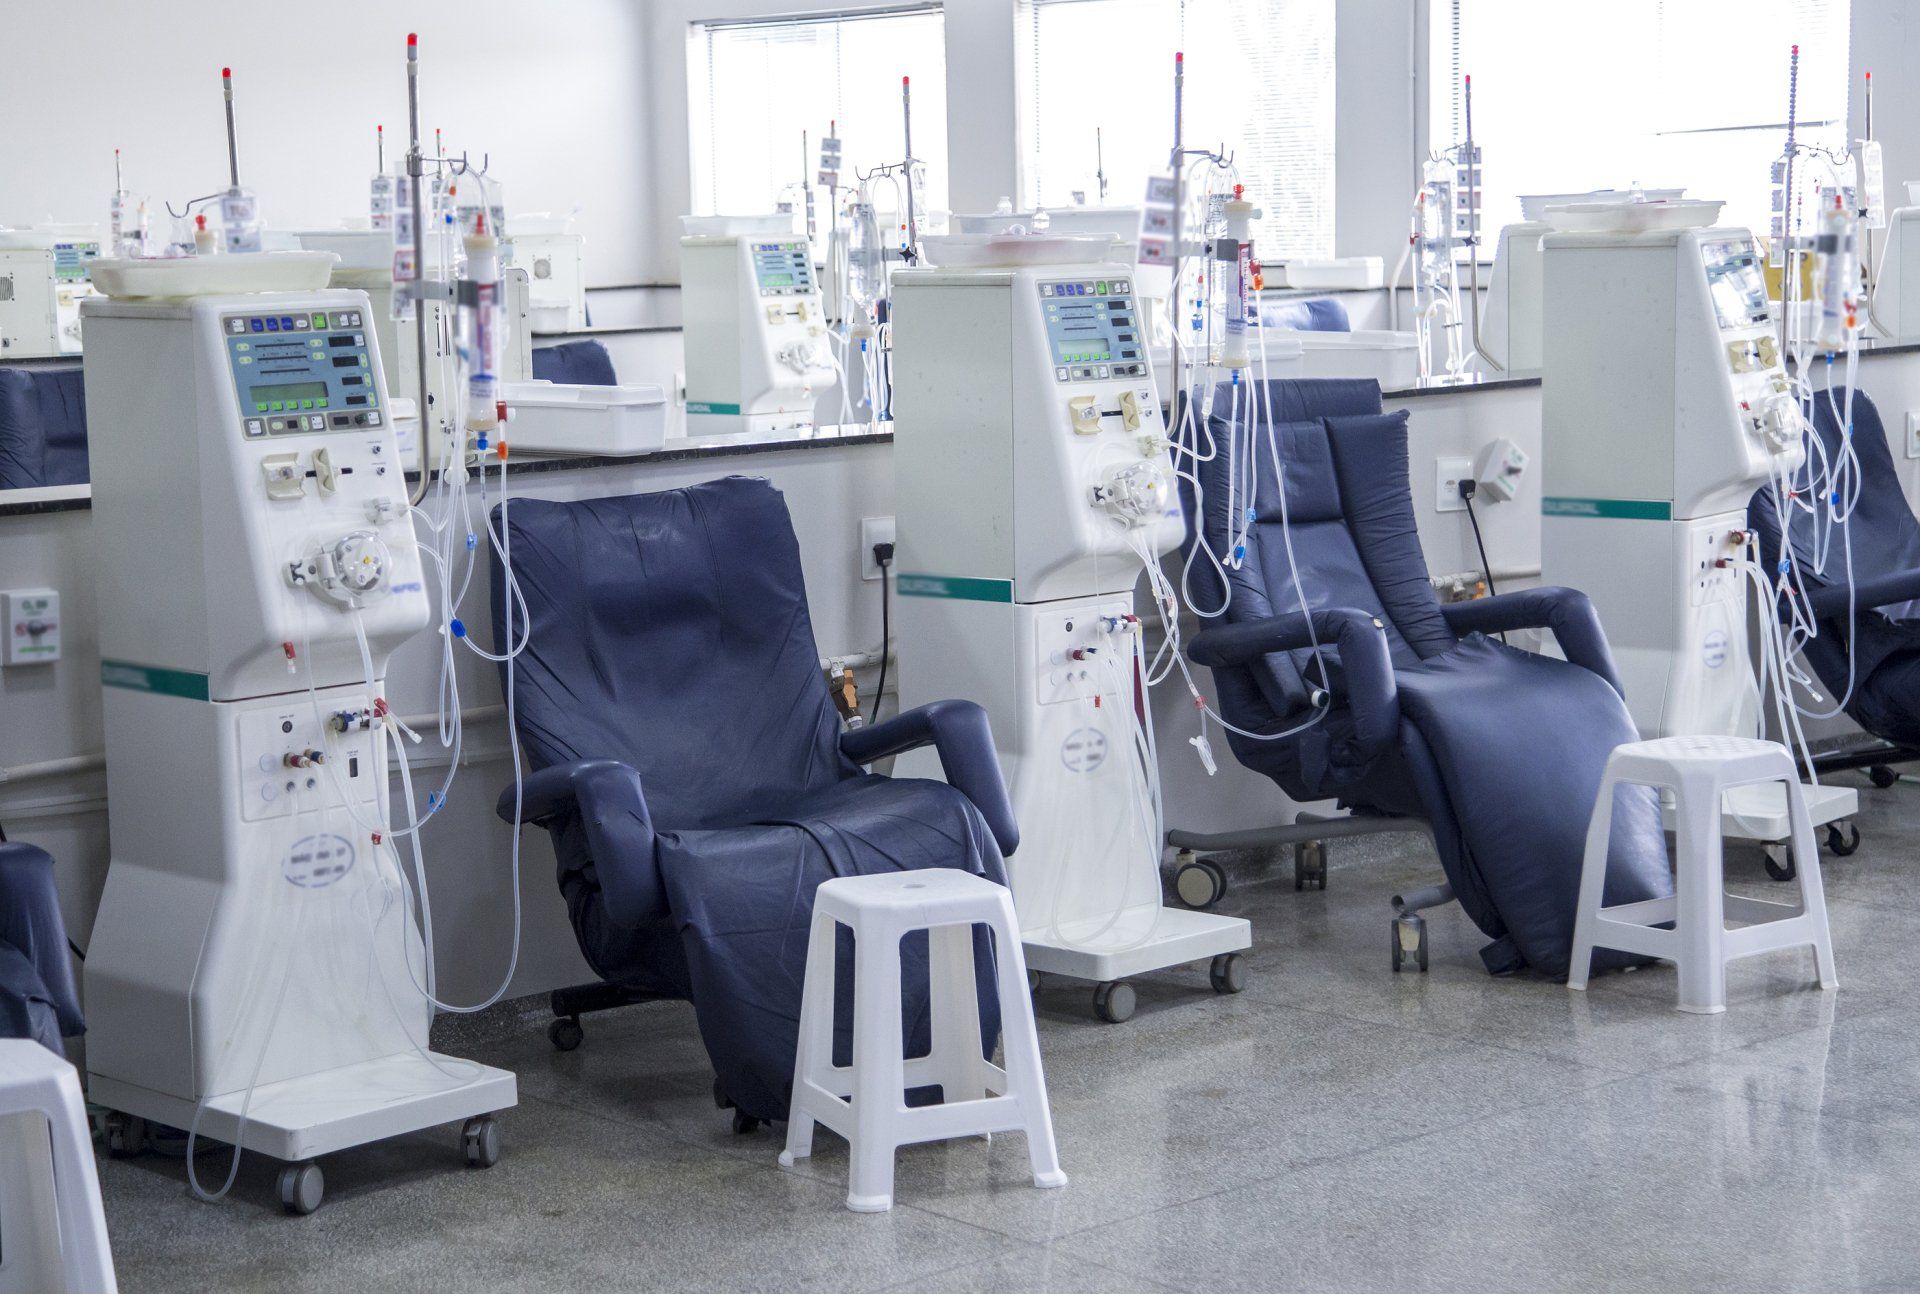 Dialysis chairs and equipment